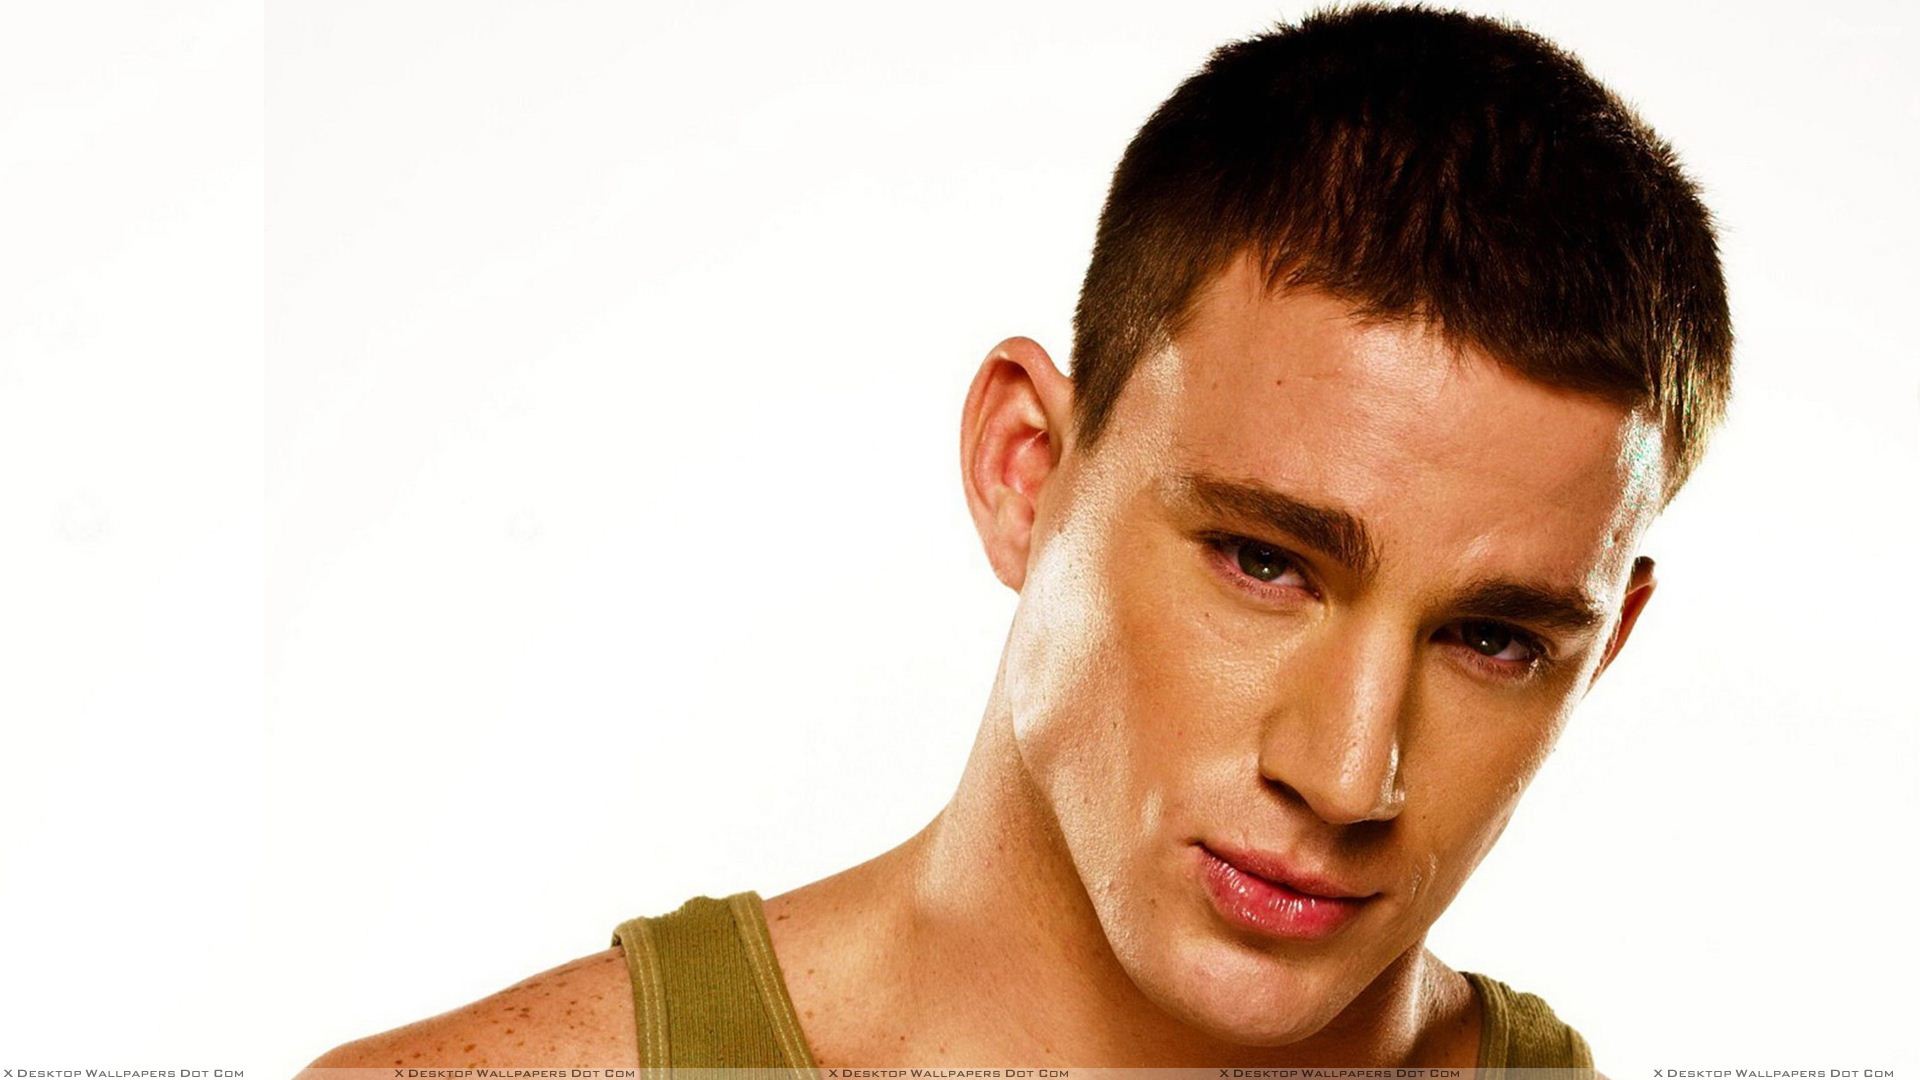 1920x1080 You are viewing wallpaper titled "Channing Tatum ...